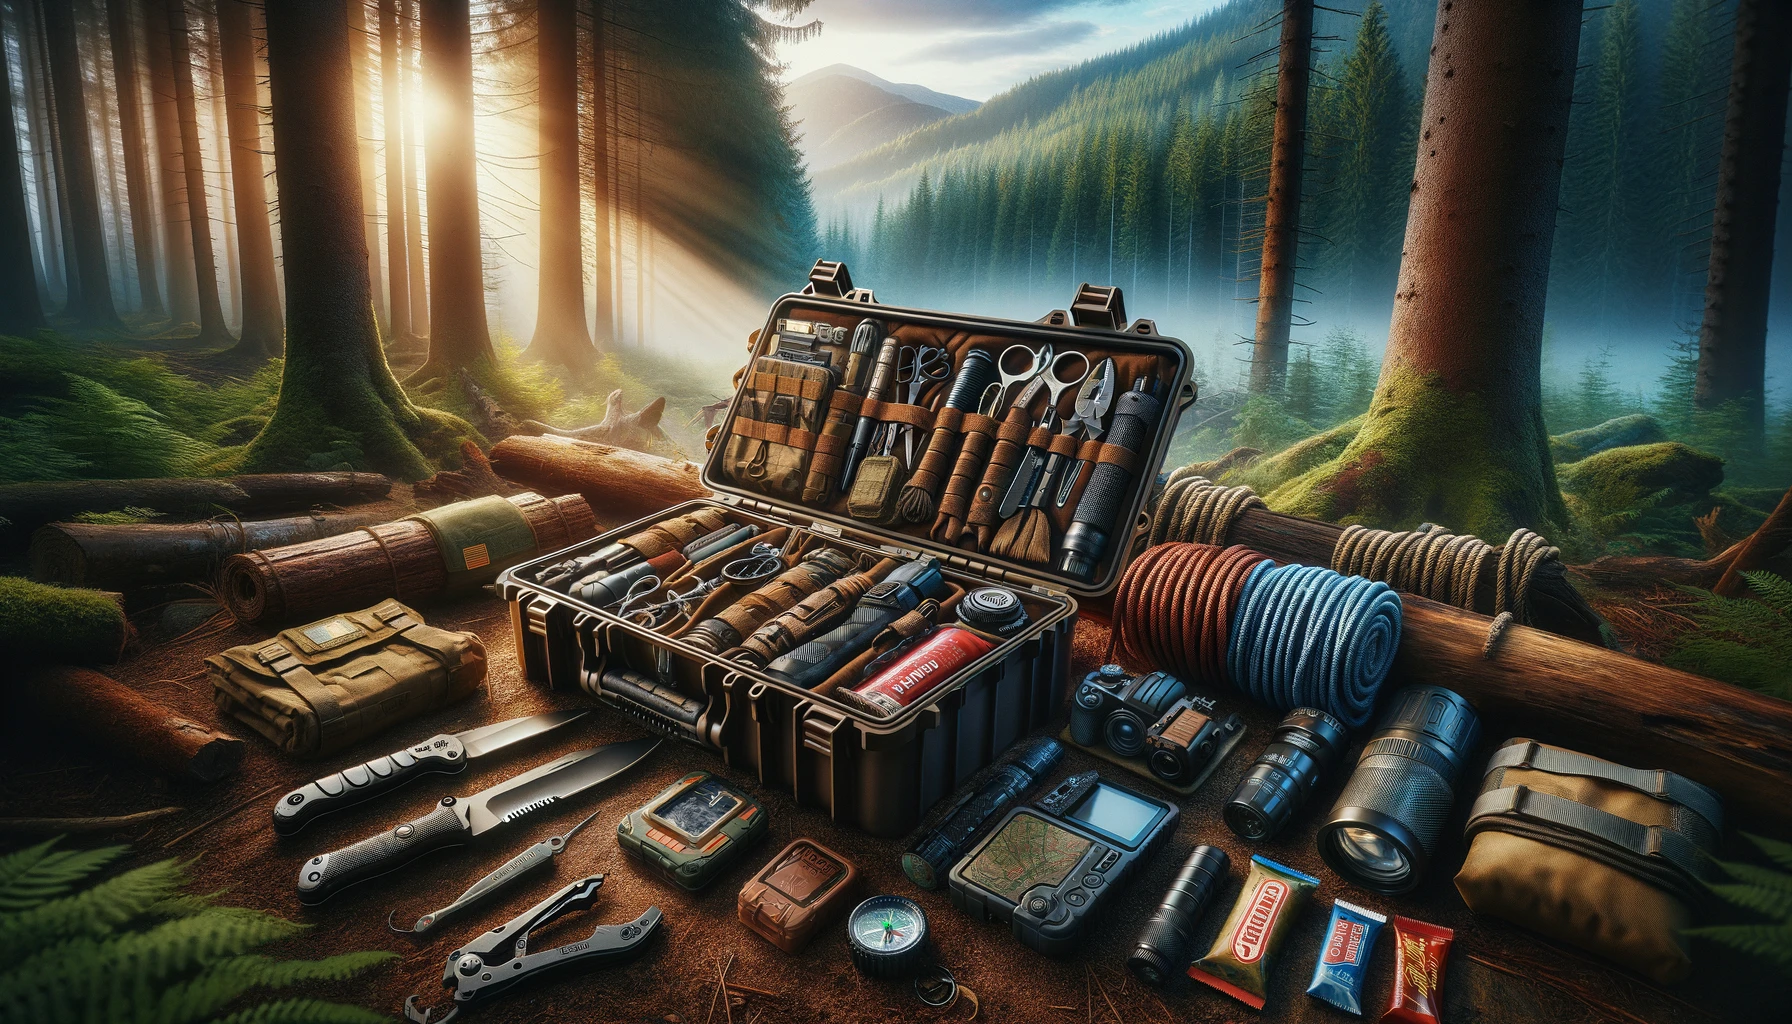 Detailed wilderness survival kit displayed on a forest floor, featuring essential items like a durable knife, multi-tool, compass, waterproof map, water filter, fire starter, first aid kit, rope, flashlight, and food bars, set against a dense forest and misty mountains, highlighting preparedness and self-reliance